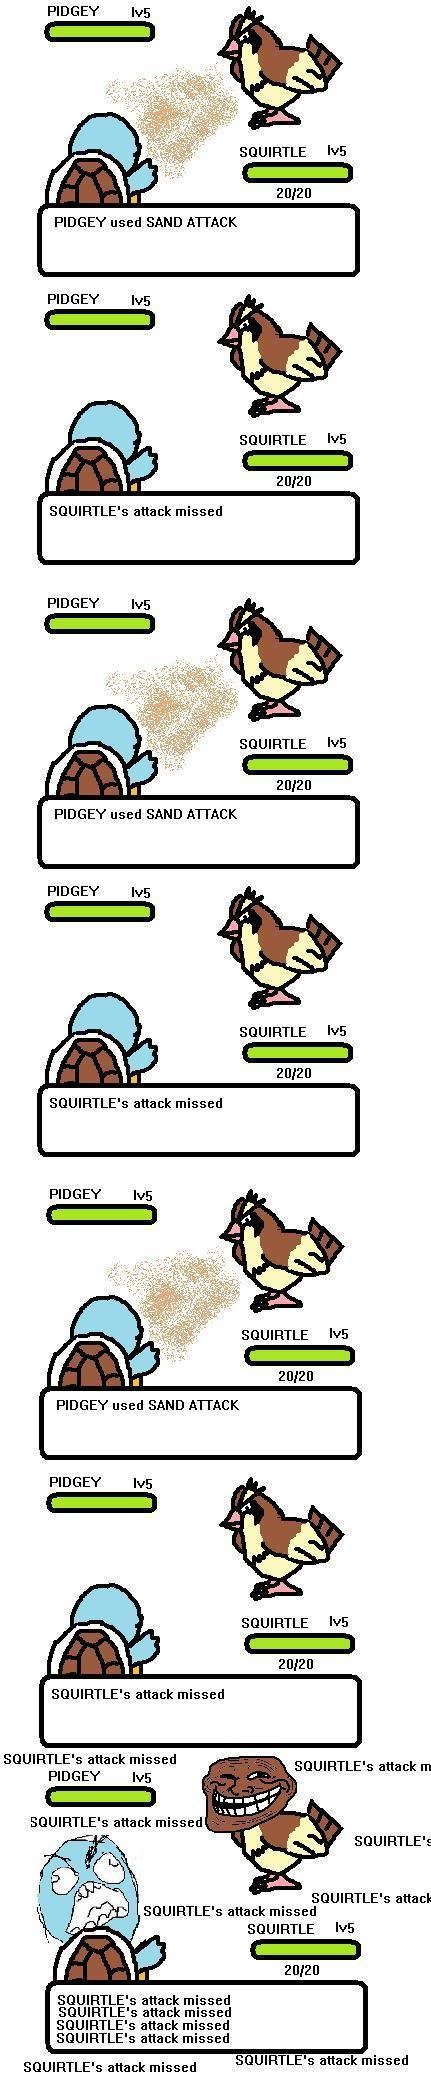 Troll Pokemon. . 20120 20120 s attack missed 20120 20120 s attack missed 20120 20120 s attack missed s attack missed PIDGEY hm s attack m s attack s attack miss